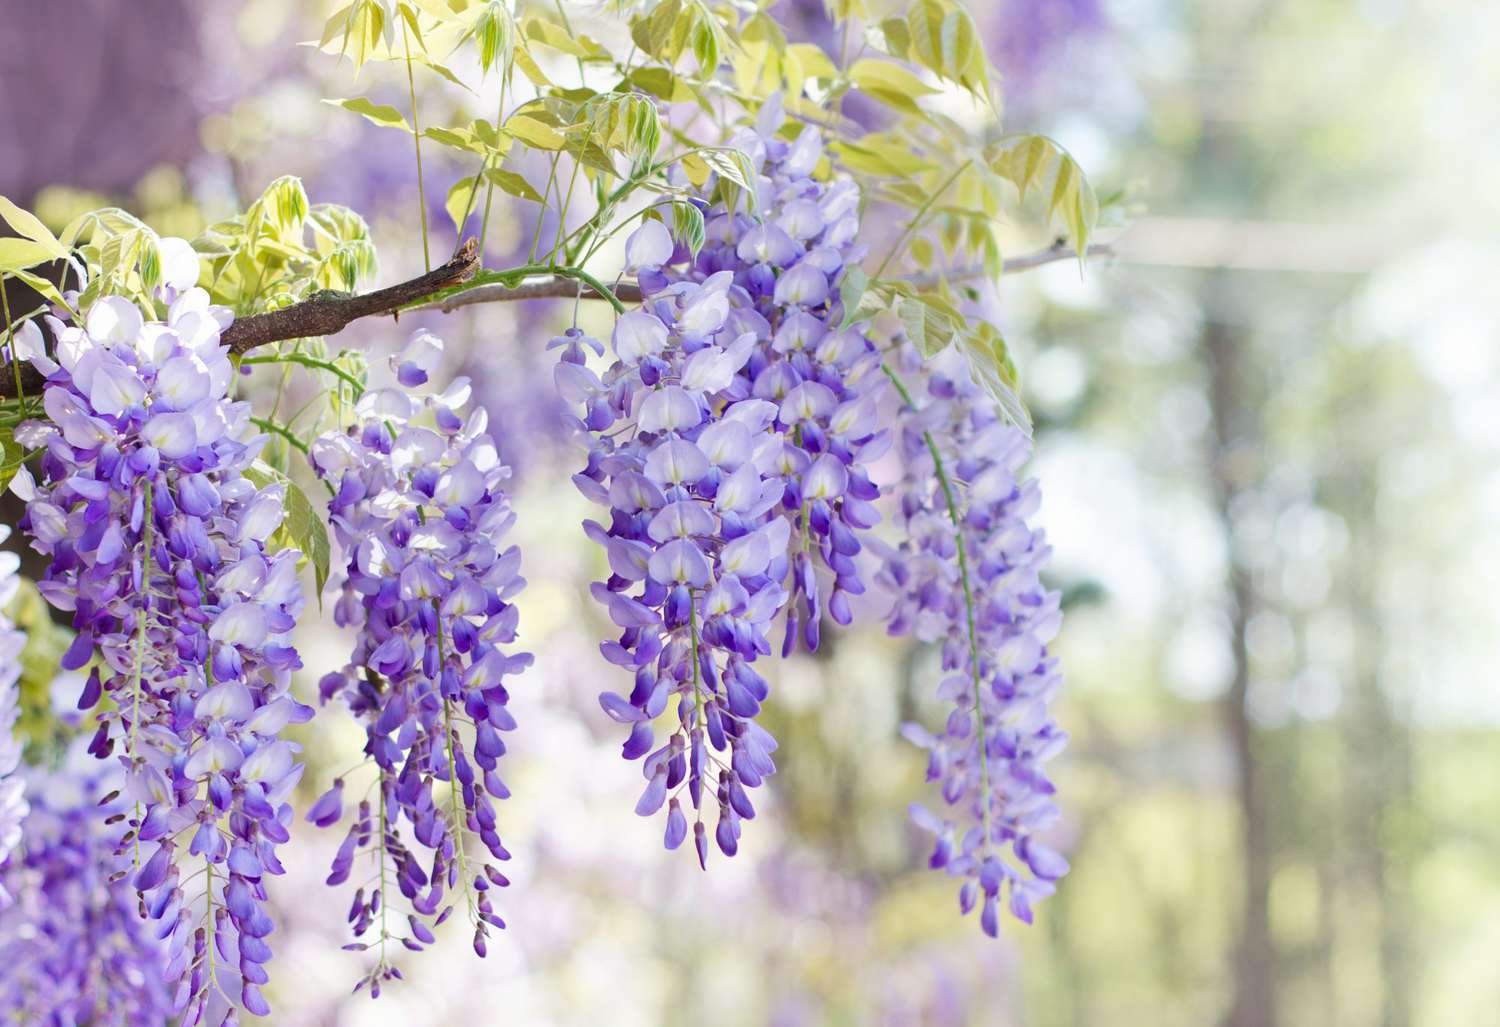 You got: Wise Wisteria! What Spring Flower Are You? 🌷 Eat a Spring-Colored Buffet to Find Out